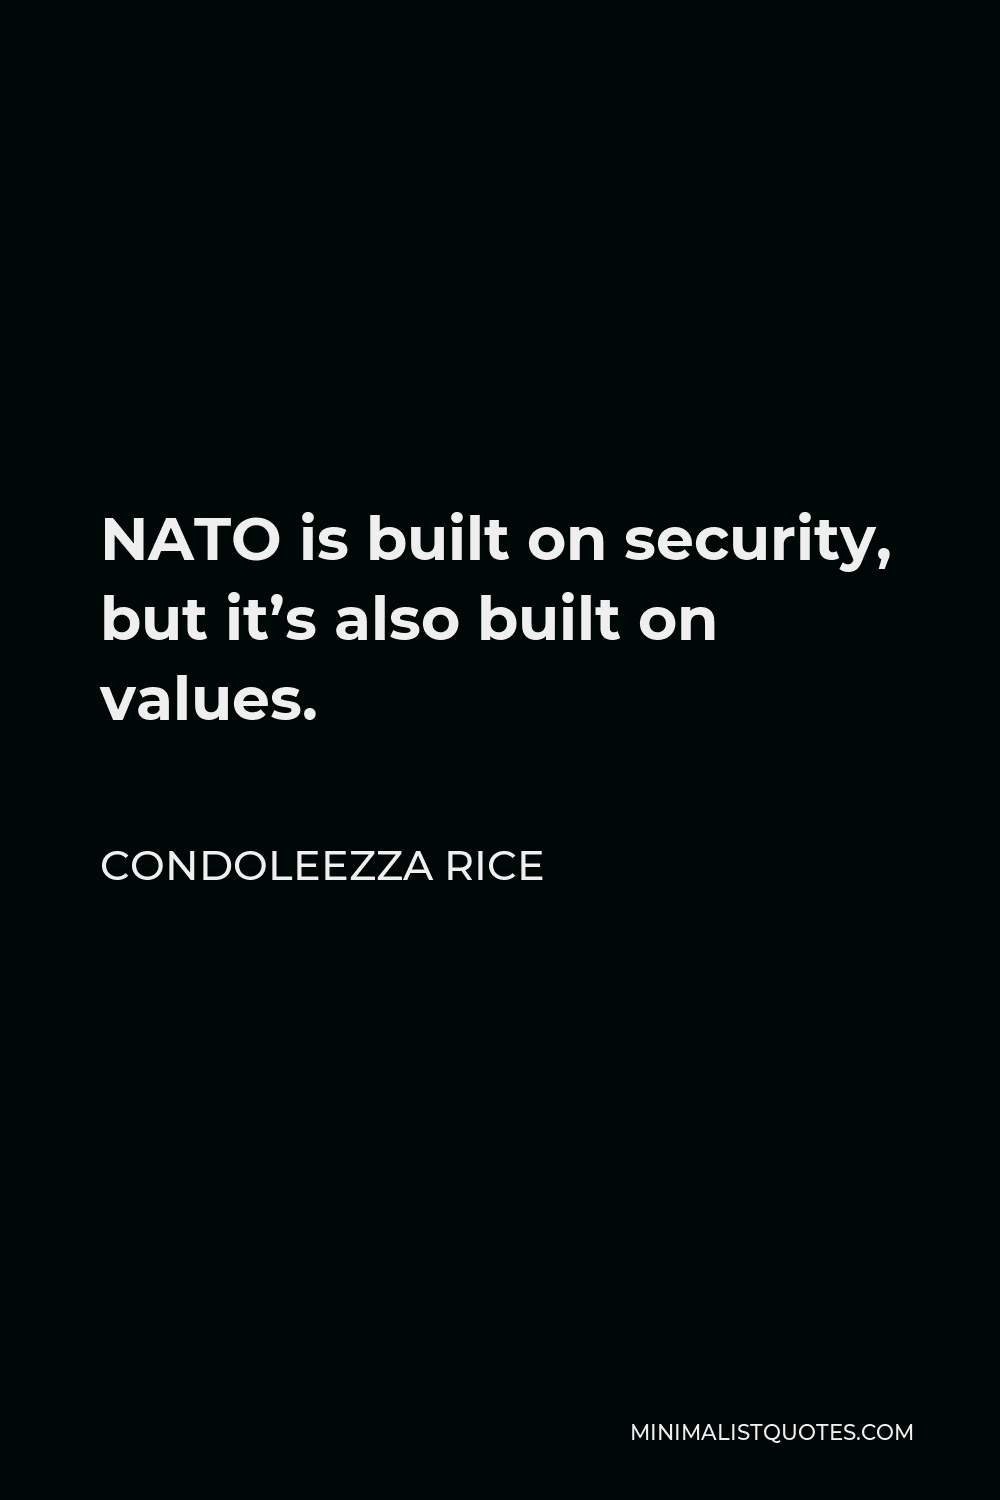 Condoleezza Rice Quote - NATO is built on security, but it’s also built on values.